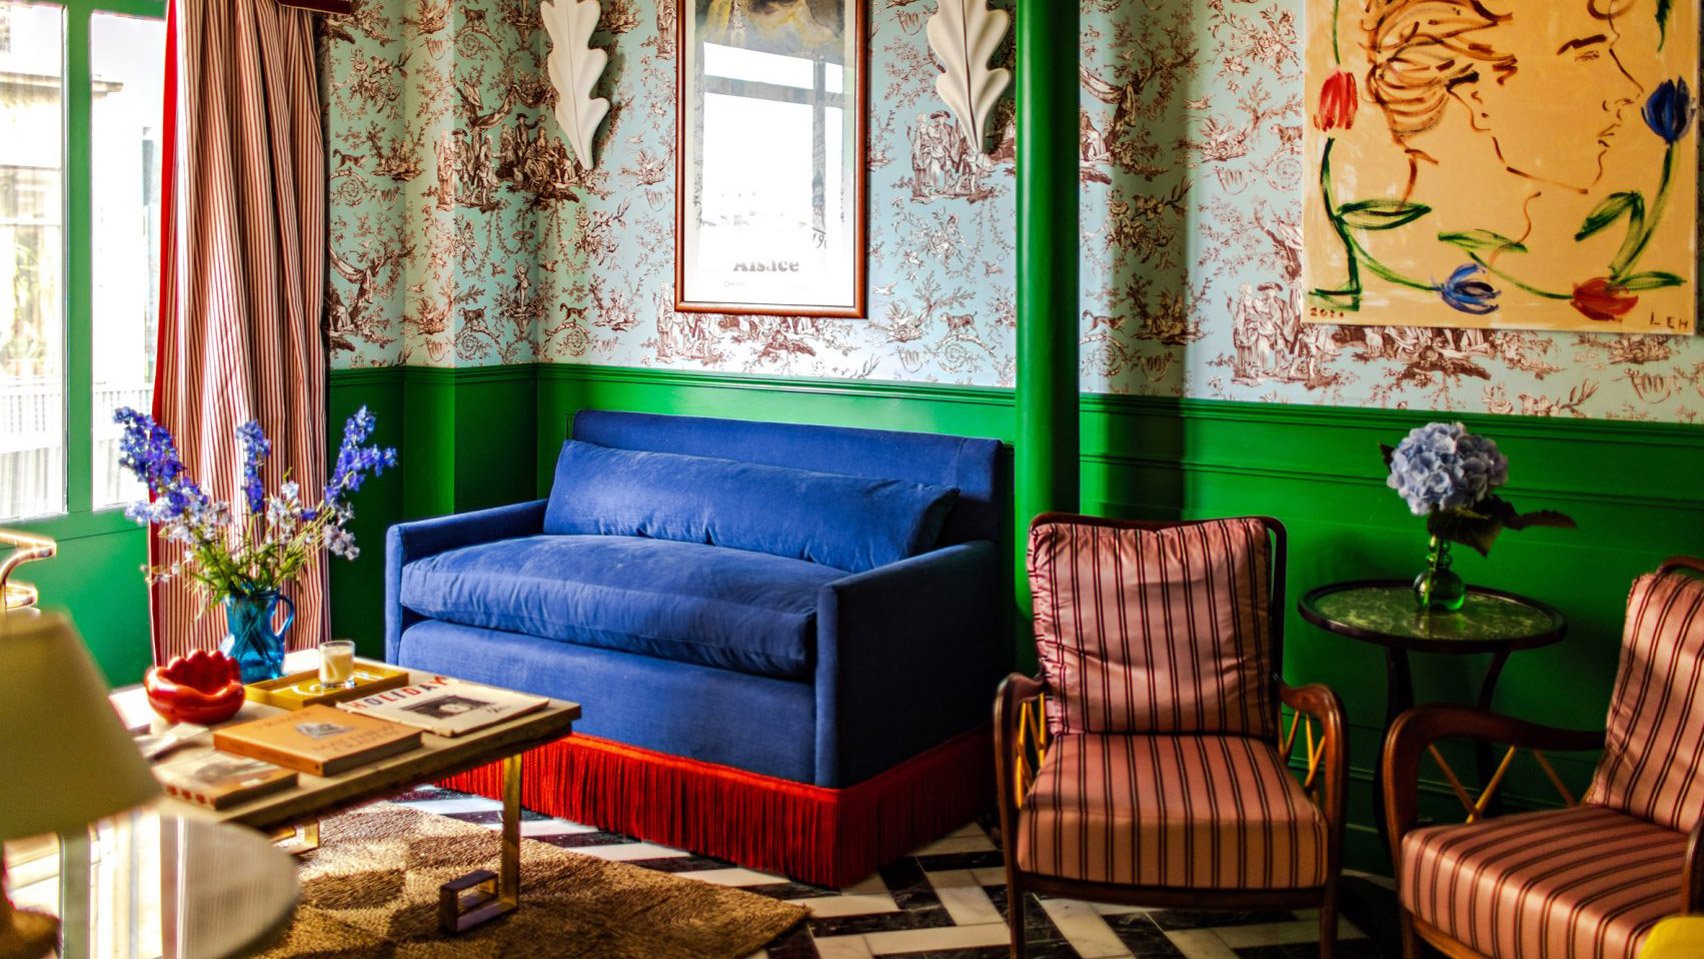 Ten maximalist interiors that are saturated with colour and pattern